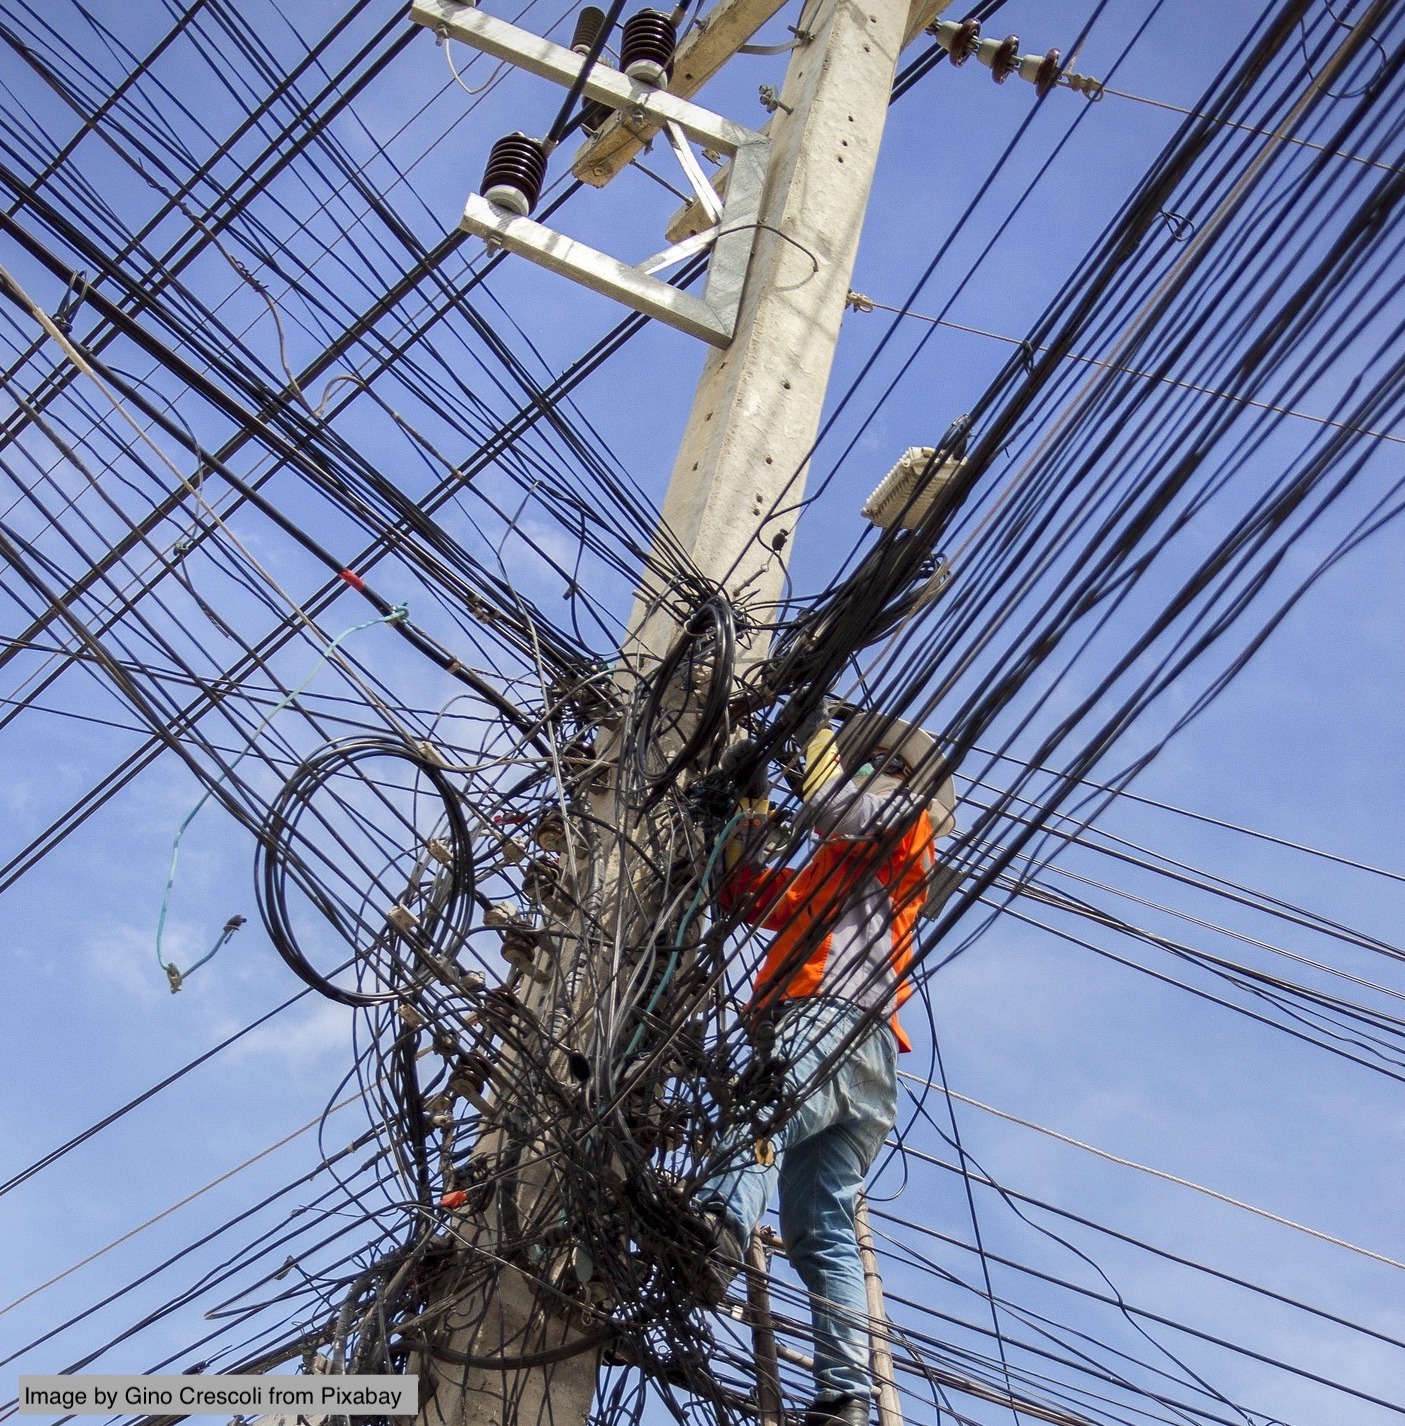 Electrical cable mess